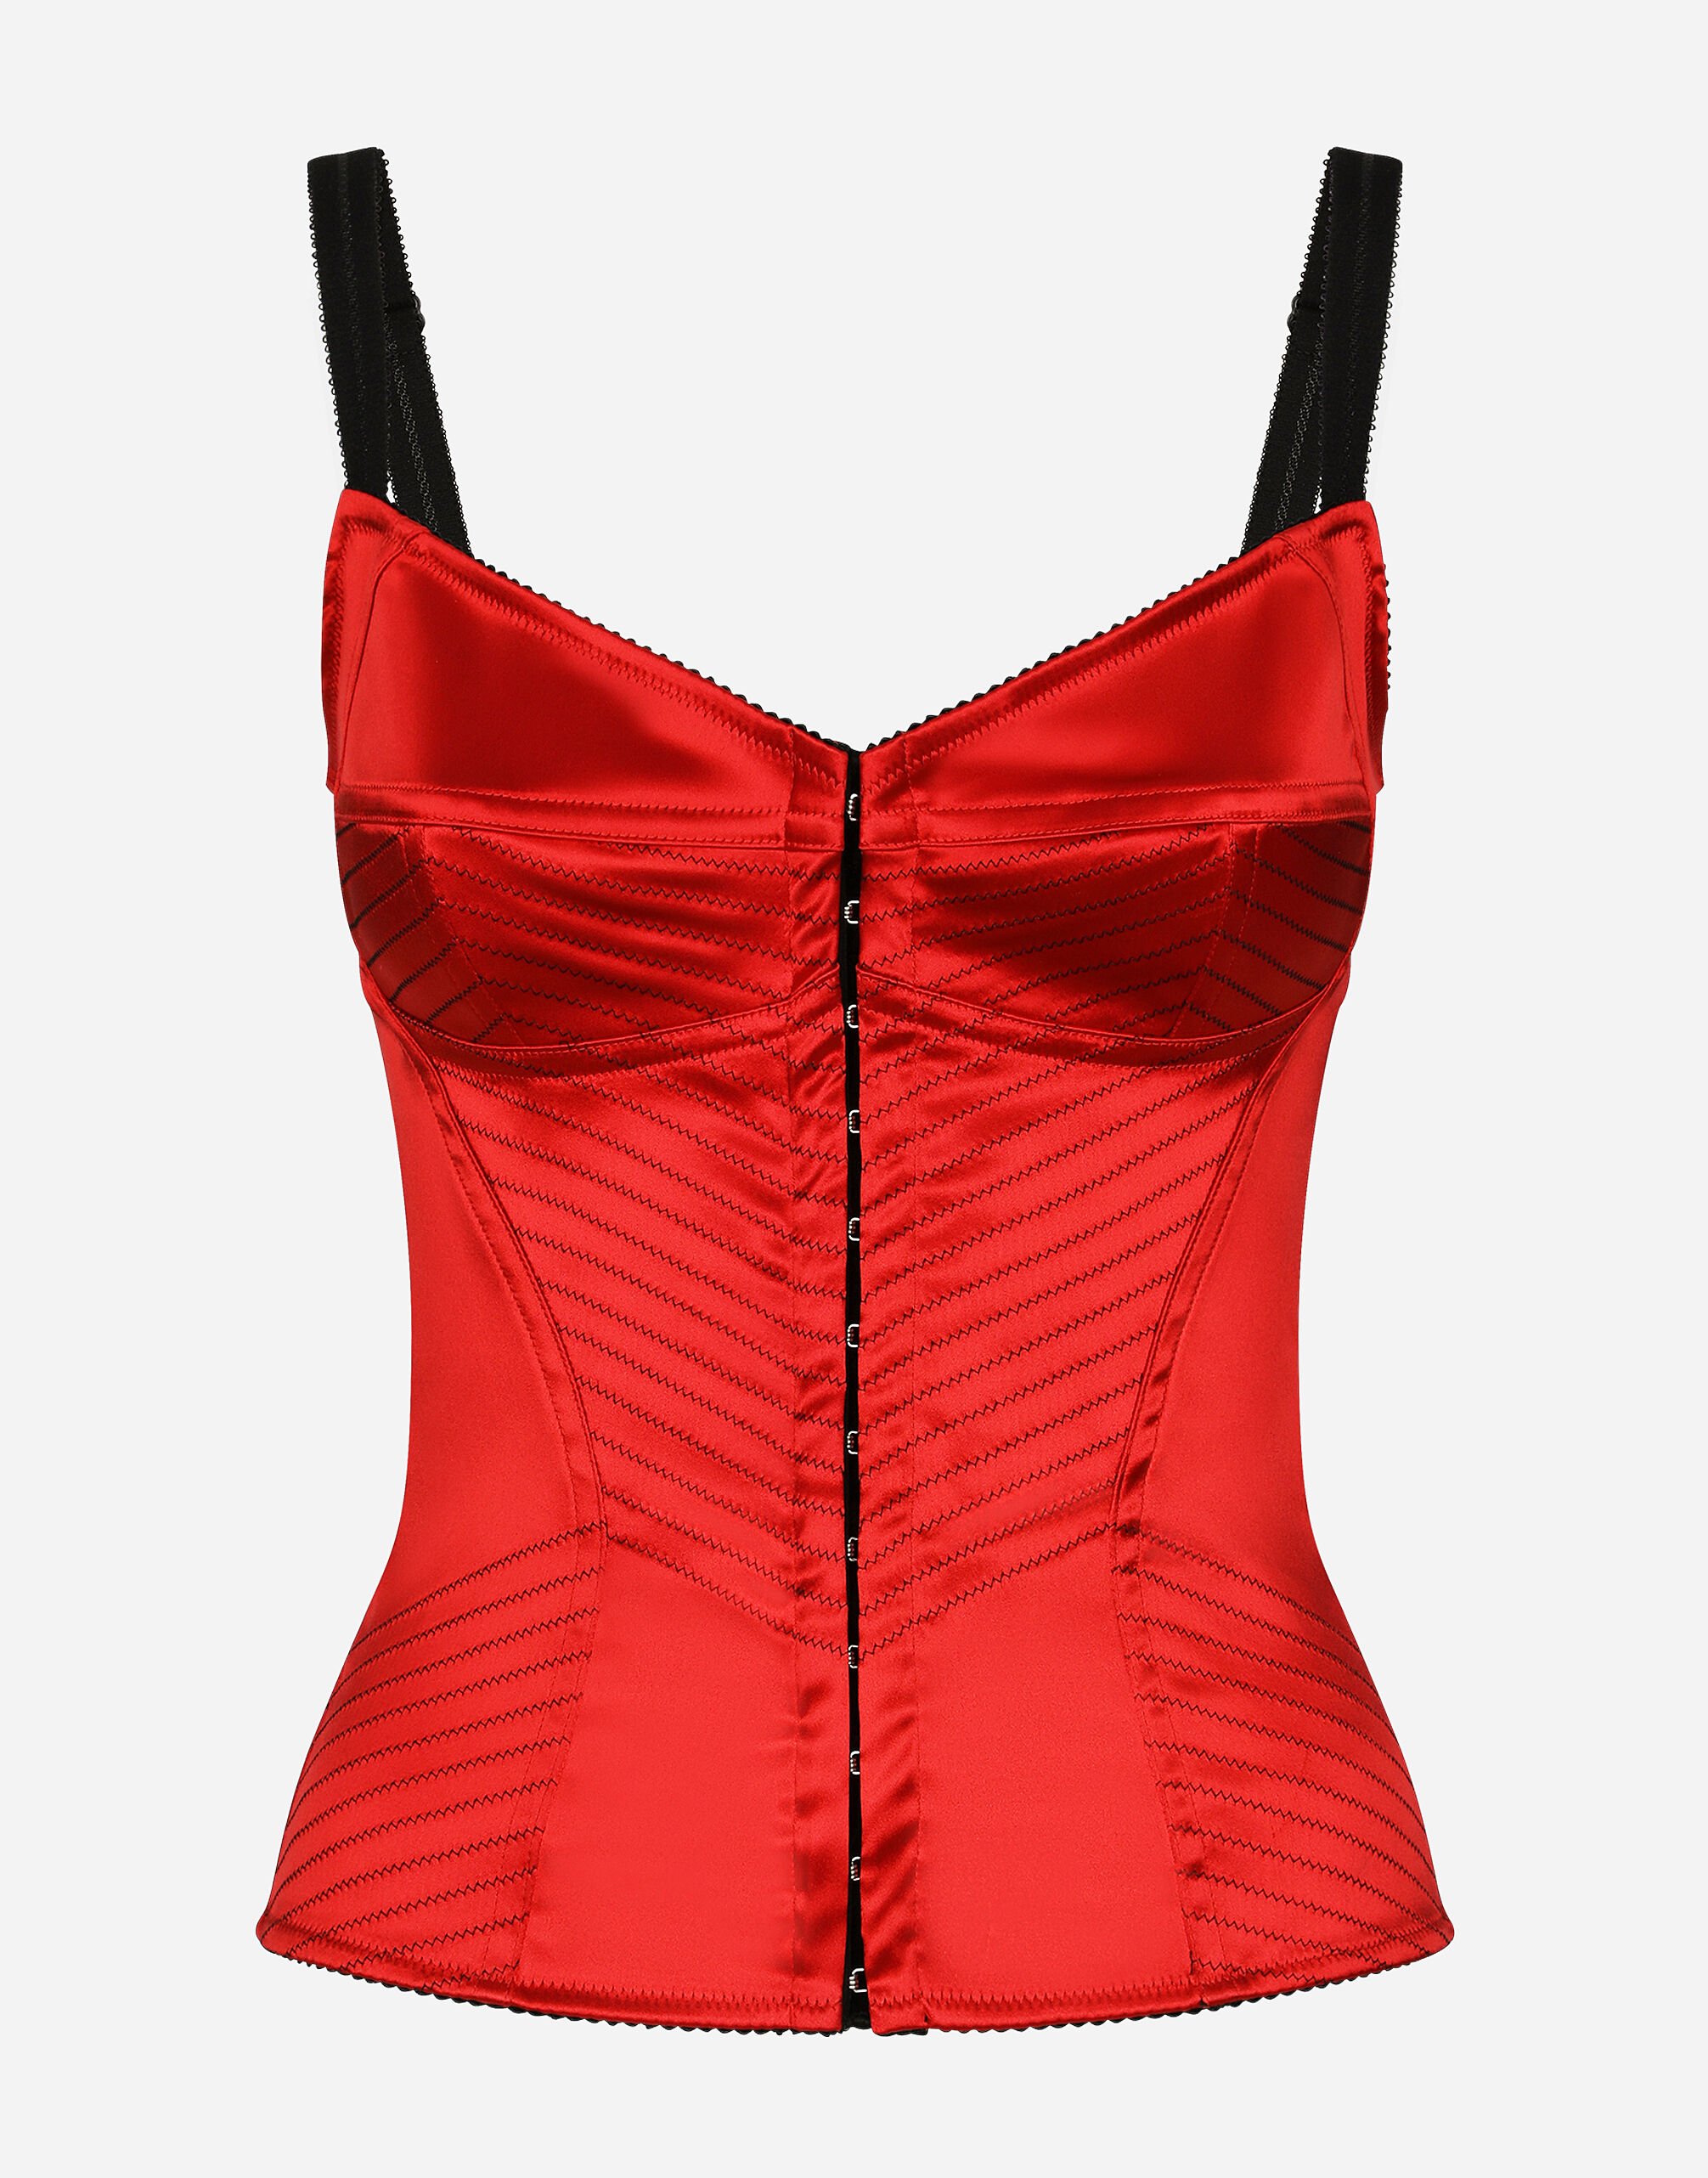 Dolce & Gabbana Satin corset with top-stitching and hook-and-eye fastenings Black F72X4TFLMSC